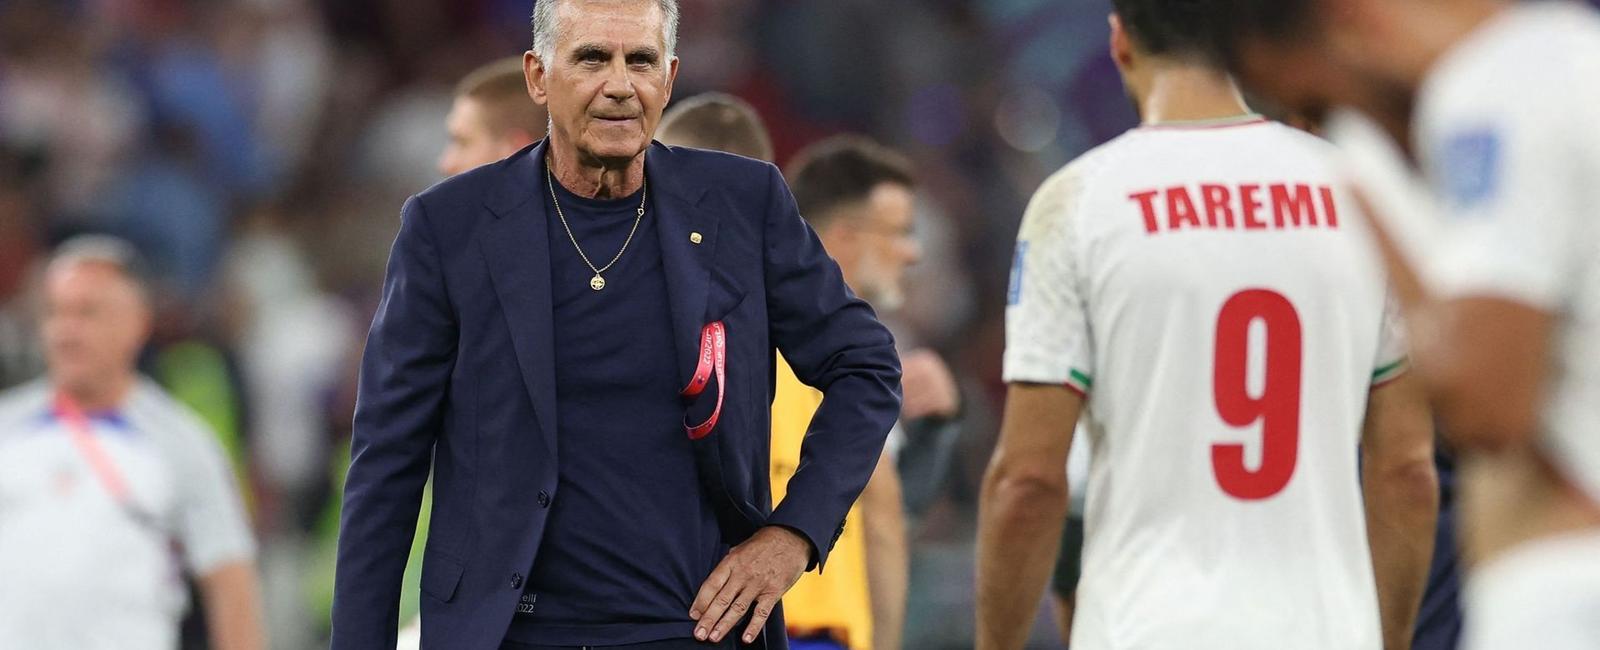 After 3 World Cups in a row, Carlos Queiroz left the Iranian national team